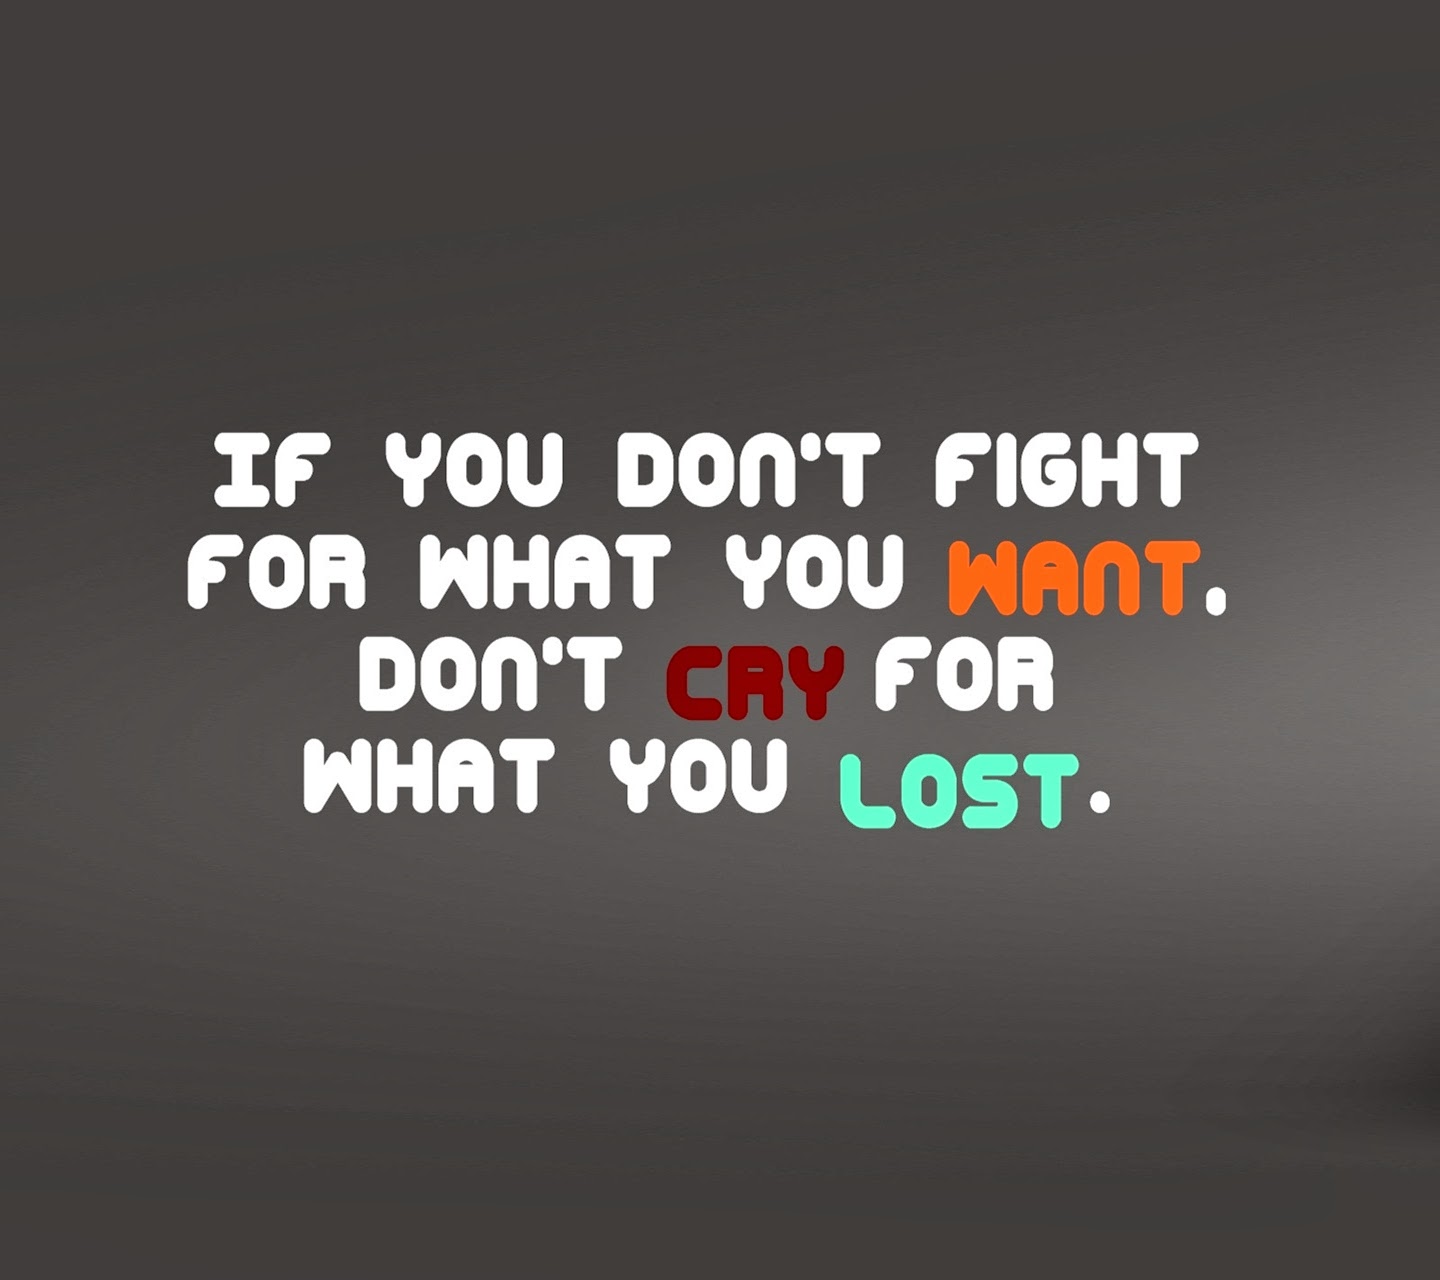 http://best-quotes-and-sayings.blogspot.com/2013/10/cry.html